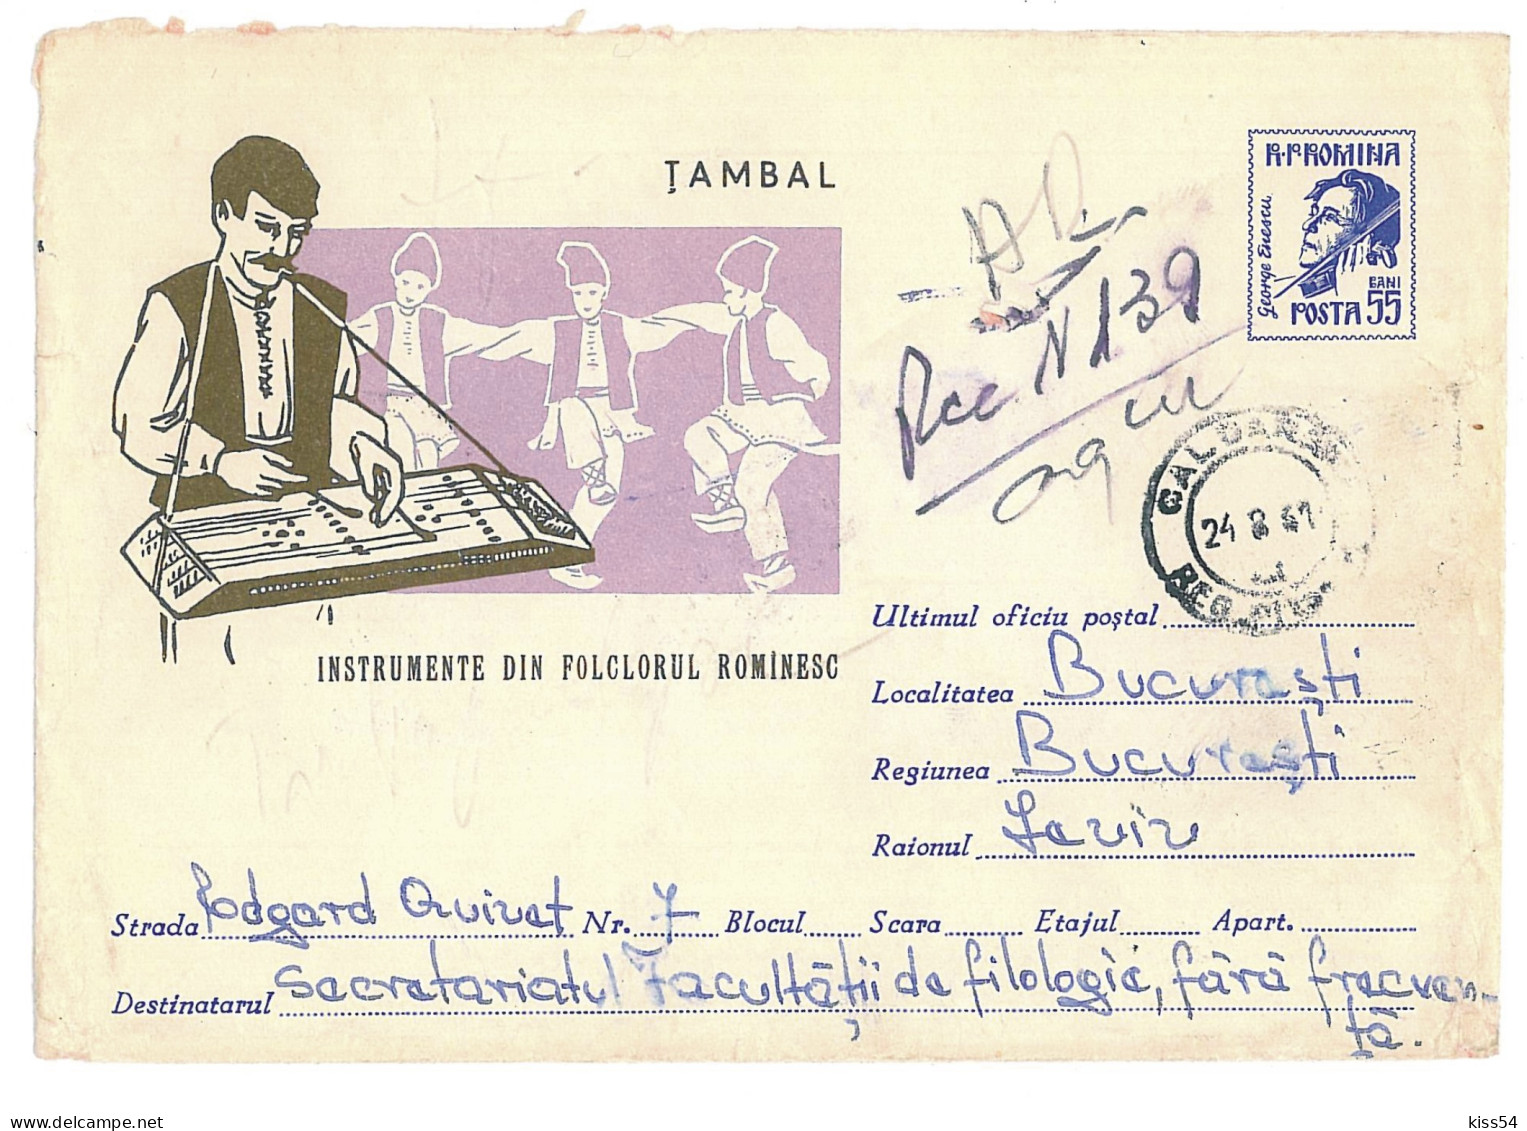 IP 61 - 0487a MUSIC, Popular Musical Instruments, Cimbalom, Romania - REGISTERED Stationery - Used - 1961 - Enteros Postales